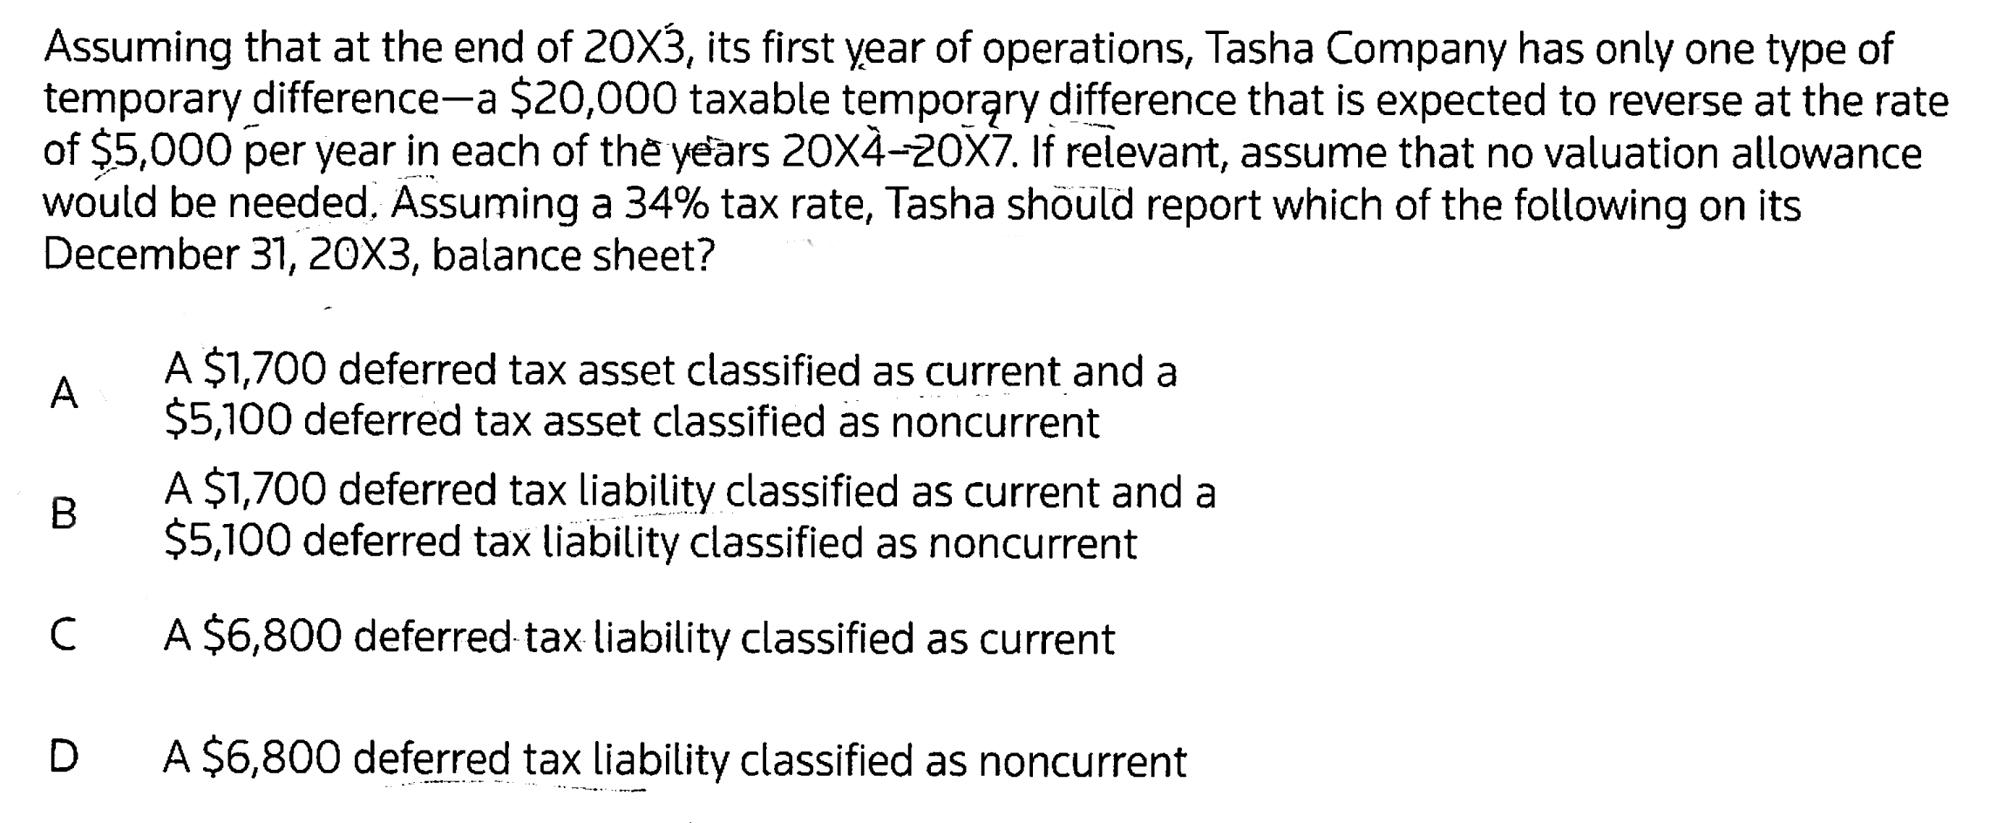 Assuming that at the end of 20X3, its first year of operations, Tasha Company has only one type oftemporary difference-a $20